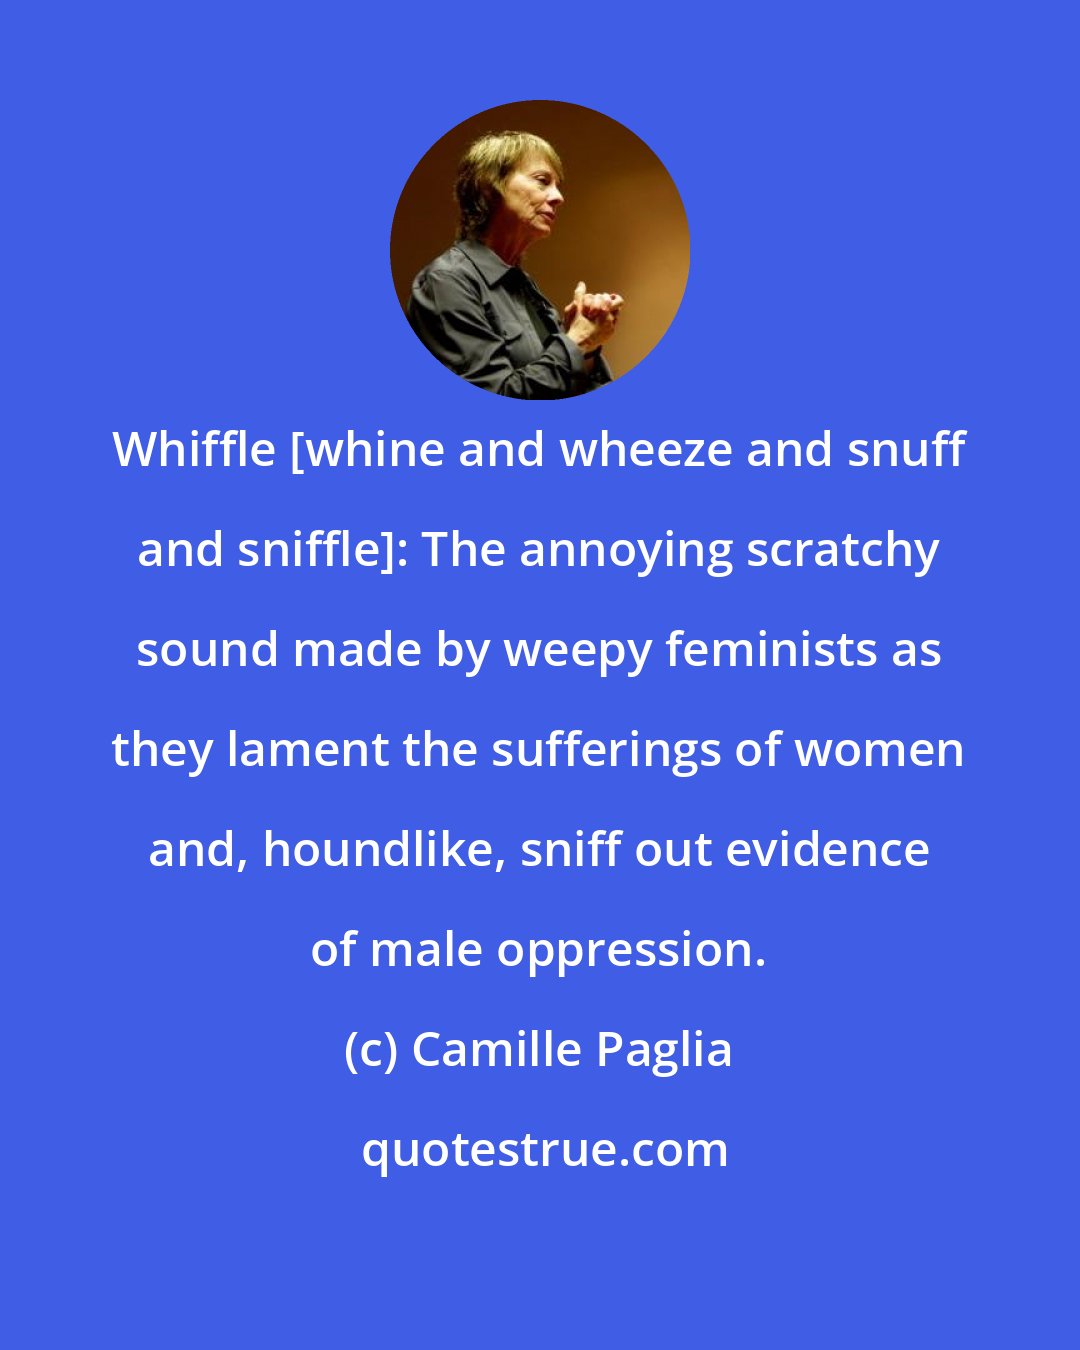 Camille Paglia: Whiffle [whine and wheeze and snuff and sniffle]: The annoying scratchy sound made by weepy feminists as they lament the sufferings of women and, houndlike, sniff out evidence of male oppression.